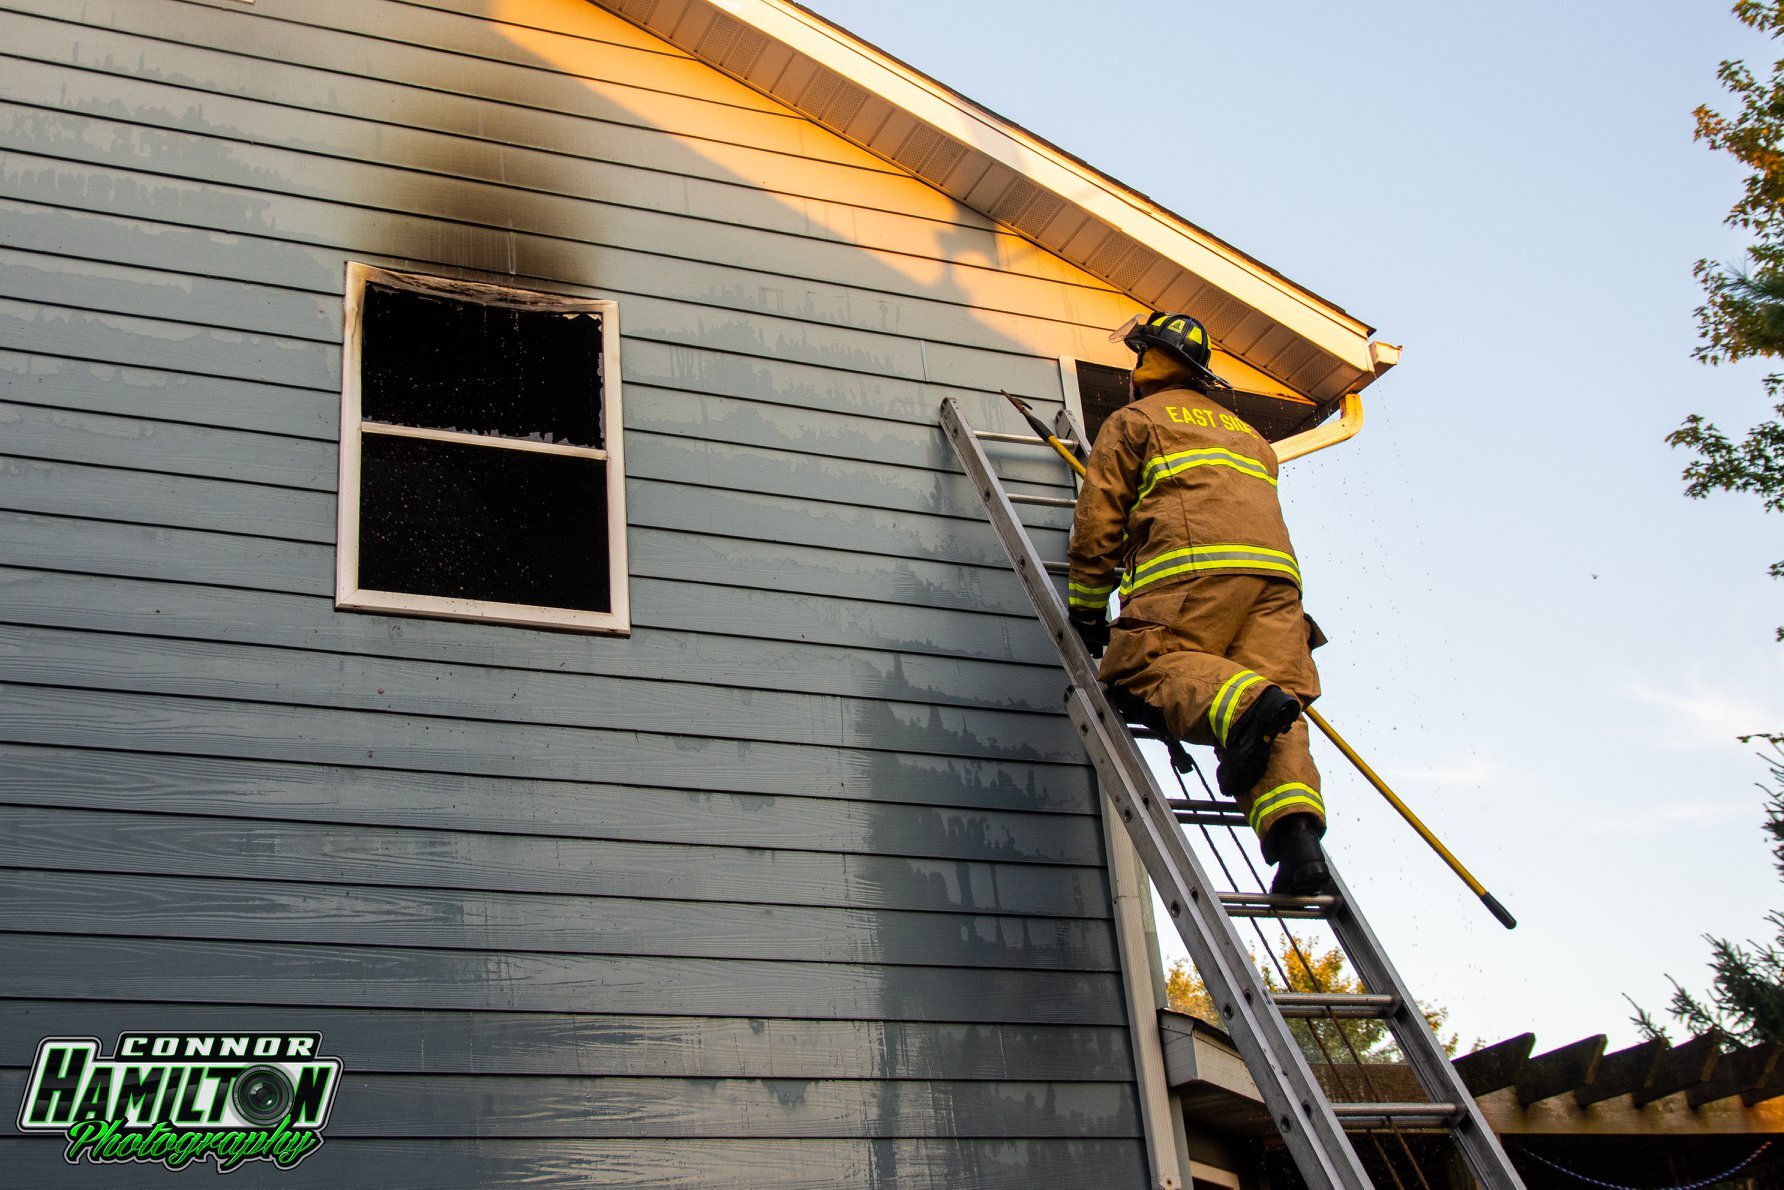  On 09/14/2019, the East Side Fire Department responded for a structure fire. Upon arrival, flames were showing from a window and skylight. Crews deployed a 1 3/4” line and brought the fire under control preventing further damage to the structure. Mu